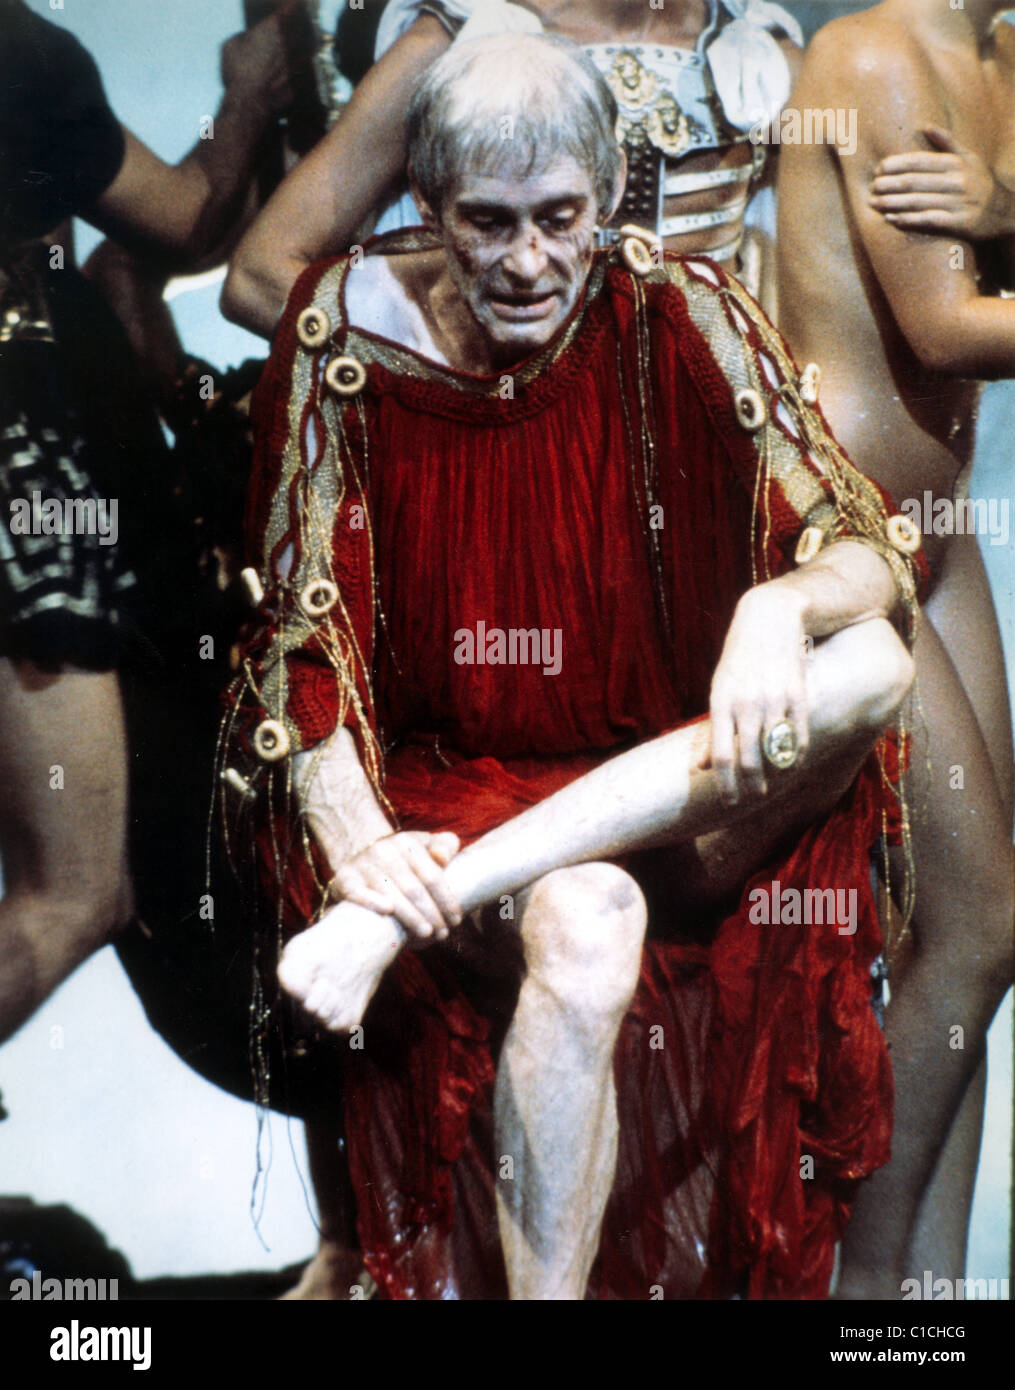 CALIGULA, mon fils (1979), Peter O'TOOLE CLGL 002CP COLLECTION MOVIESTORE LTD Banque D'Images